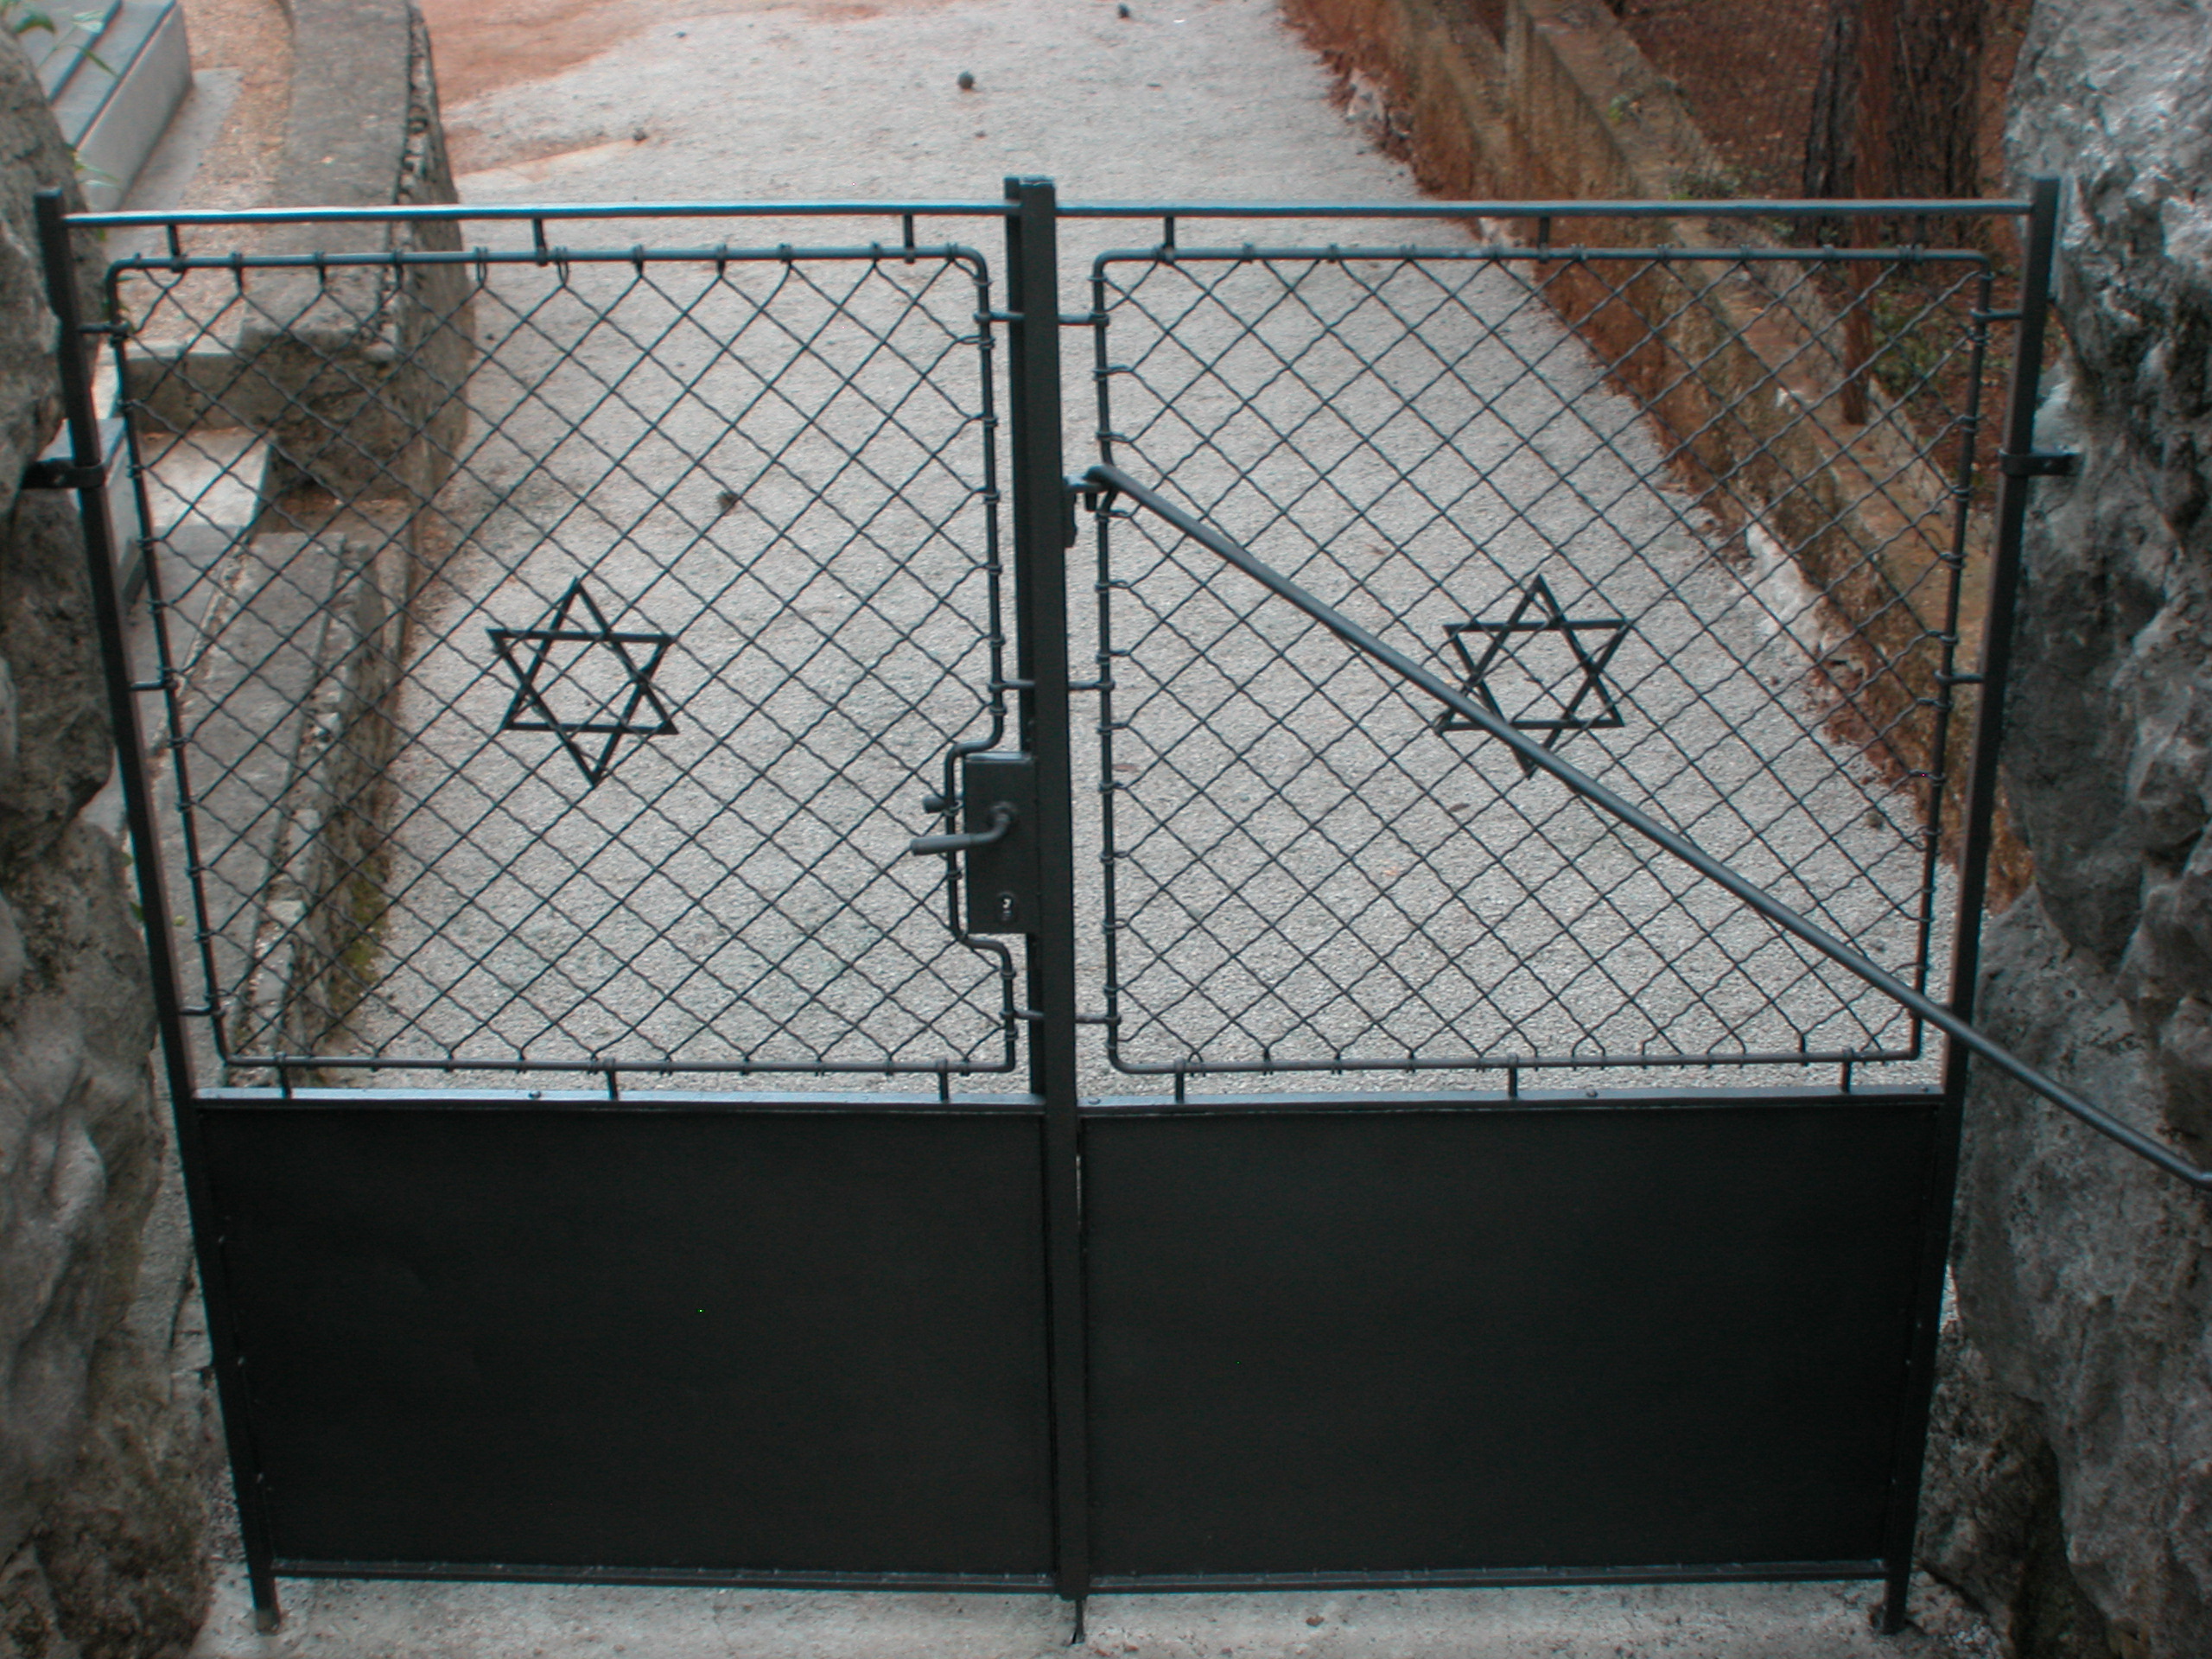 Entrance to Jewish cementery in Opatija